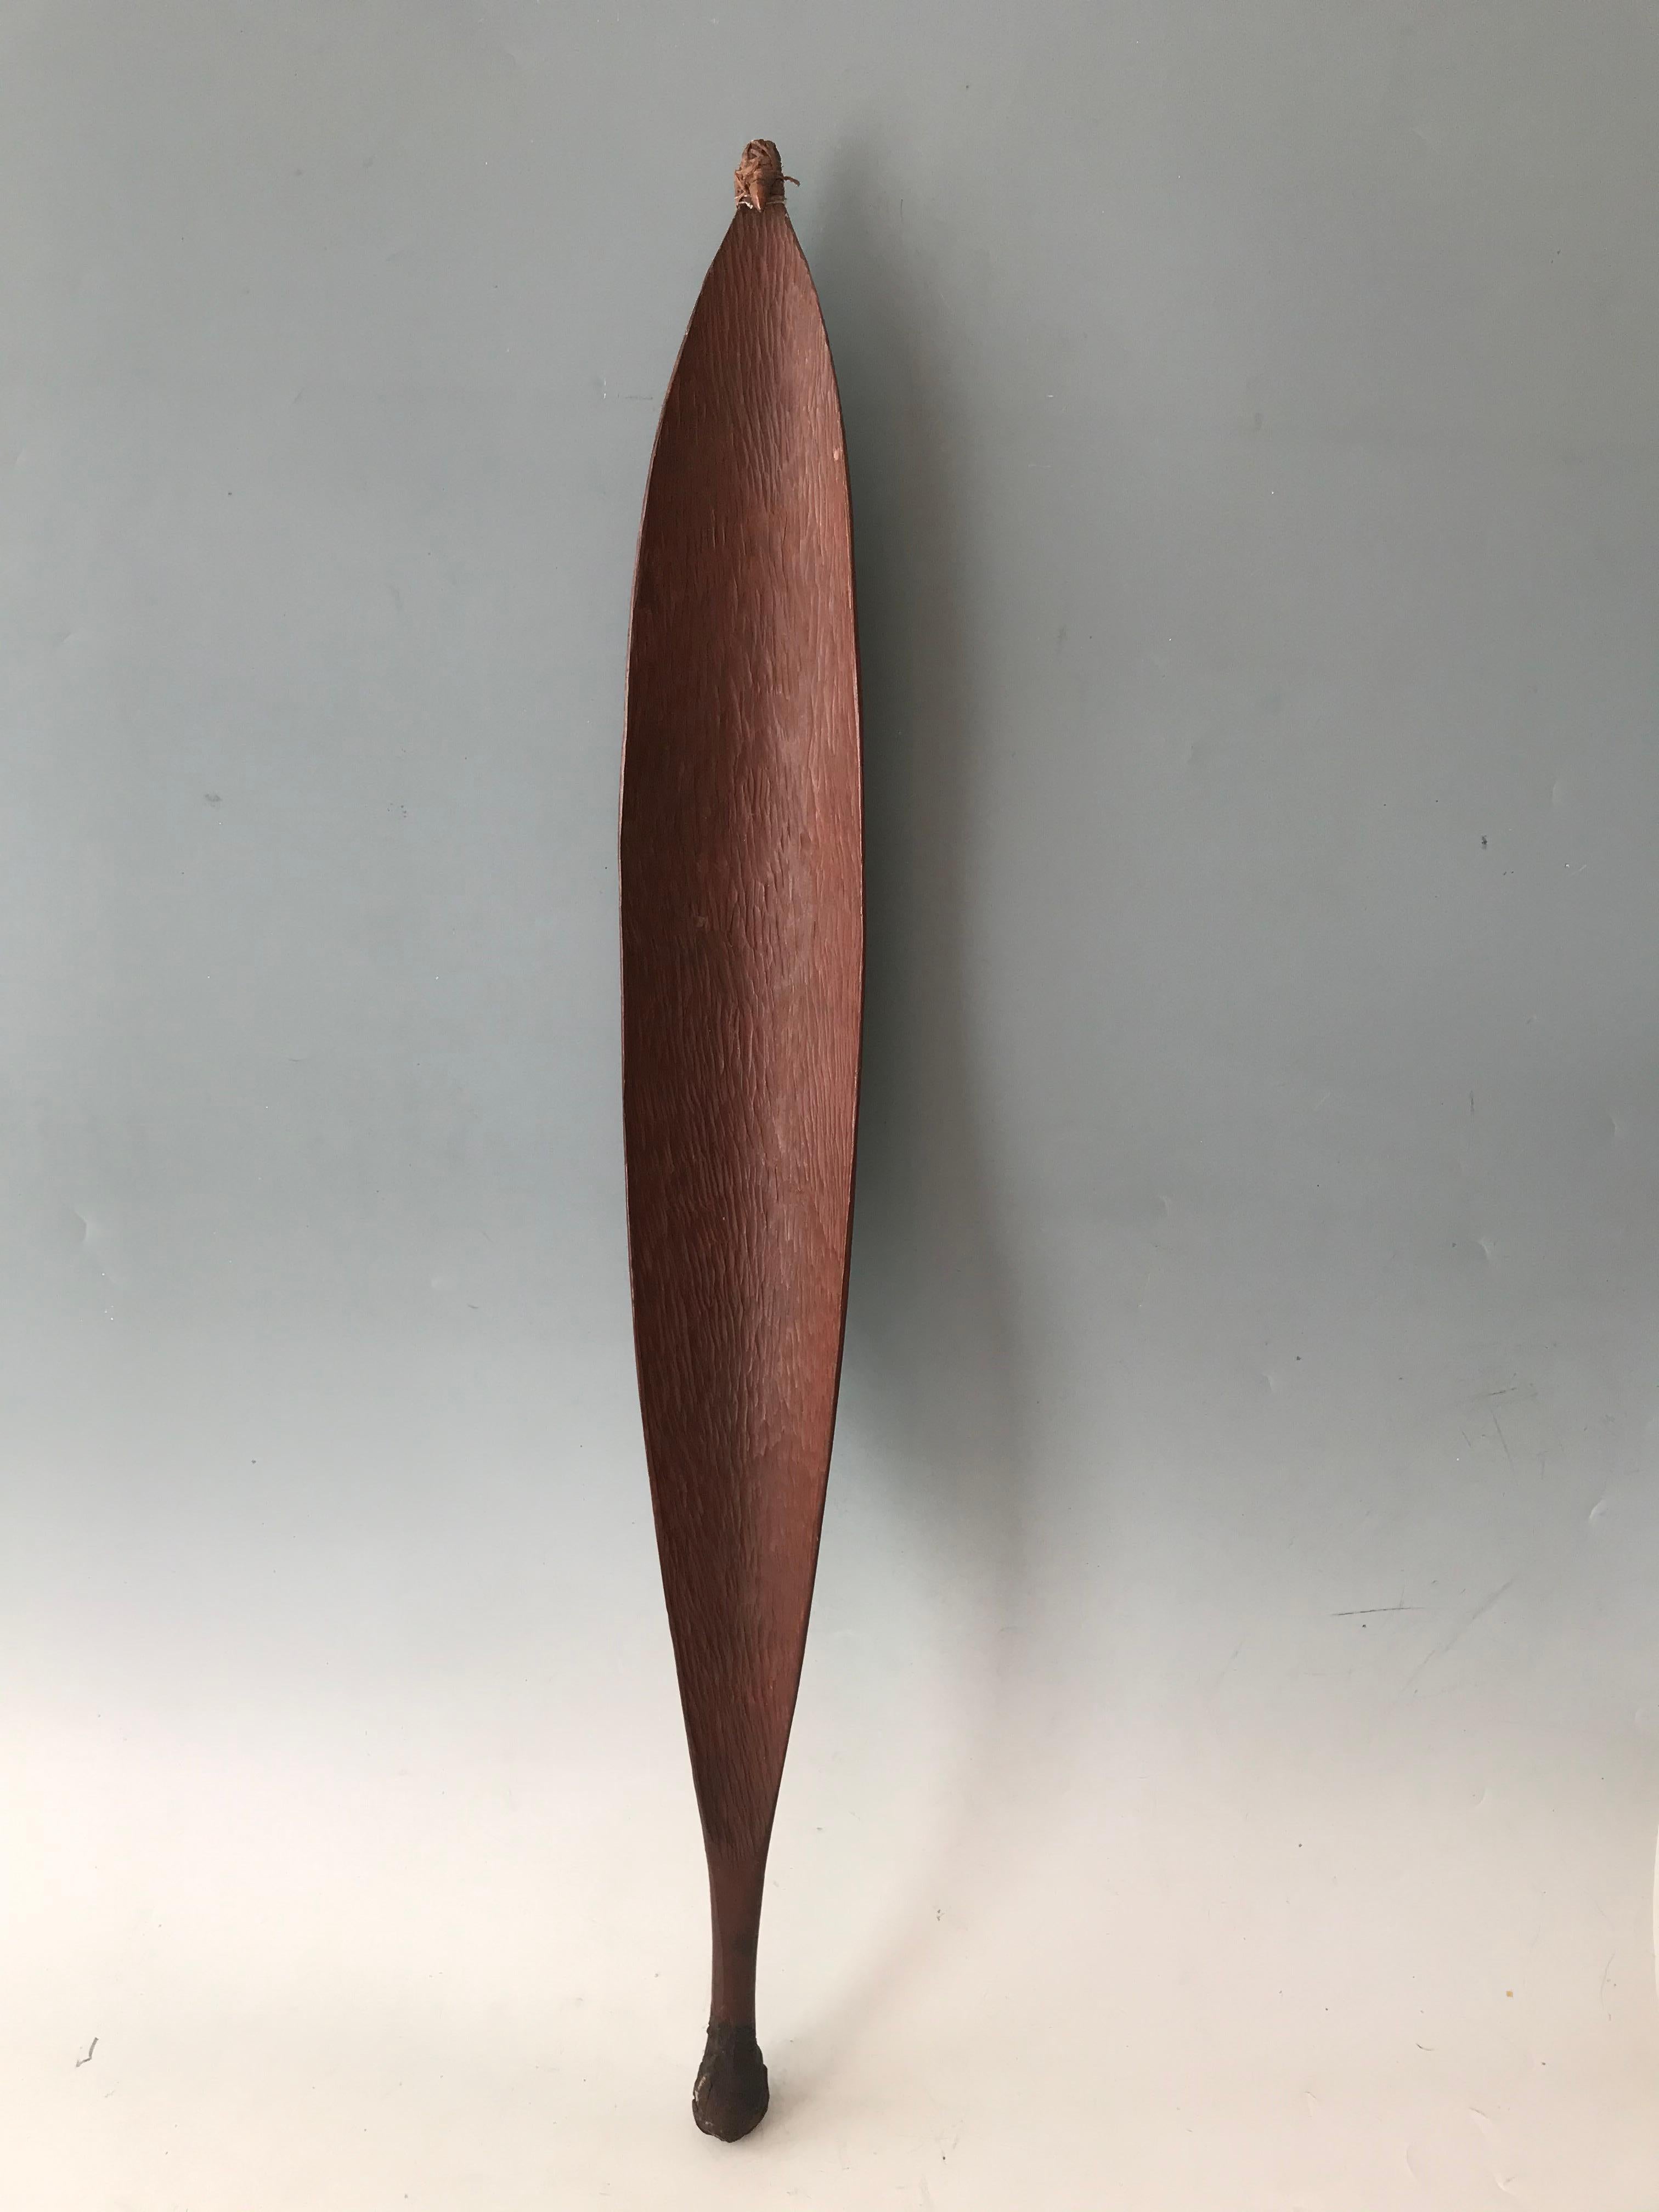 Fine Large Aboriginal woomera carved in hard mulga wood with pleasing curved chip carved interior with gum handle and possum tooth barb

Beautiful piece for collection or  interior design / home decoration

Measures: Height 35 inches

Period early